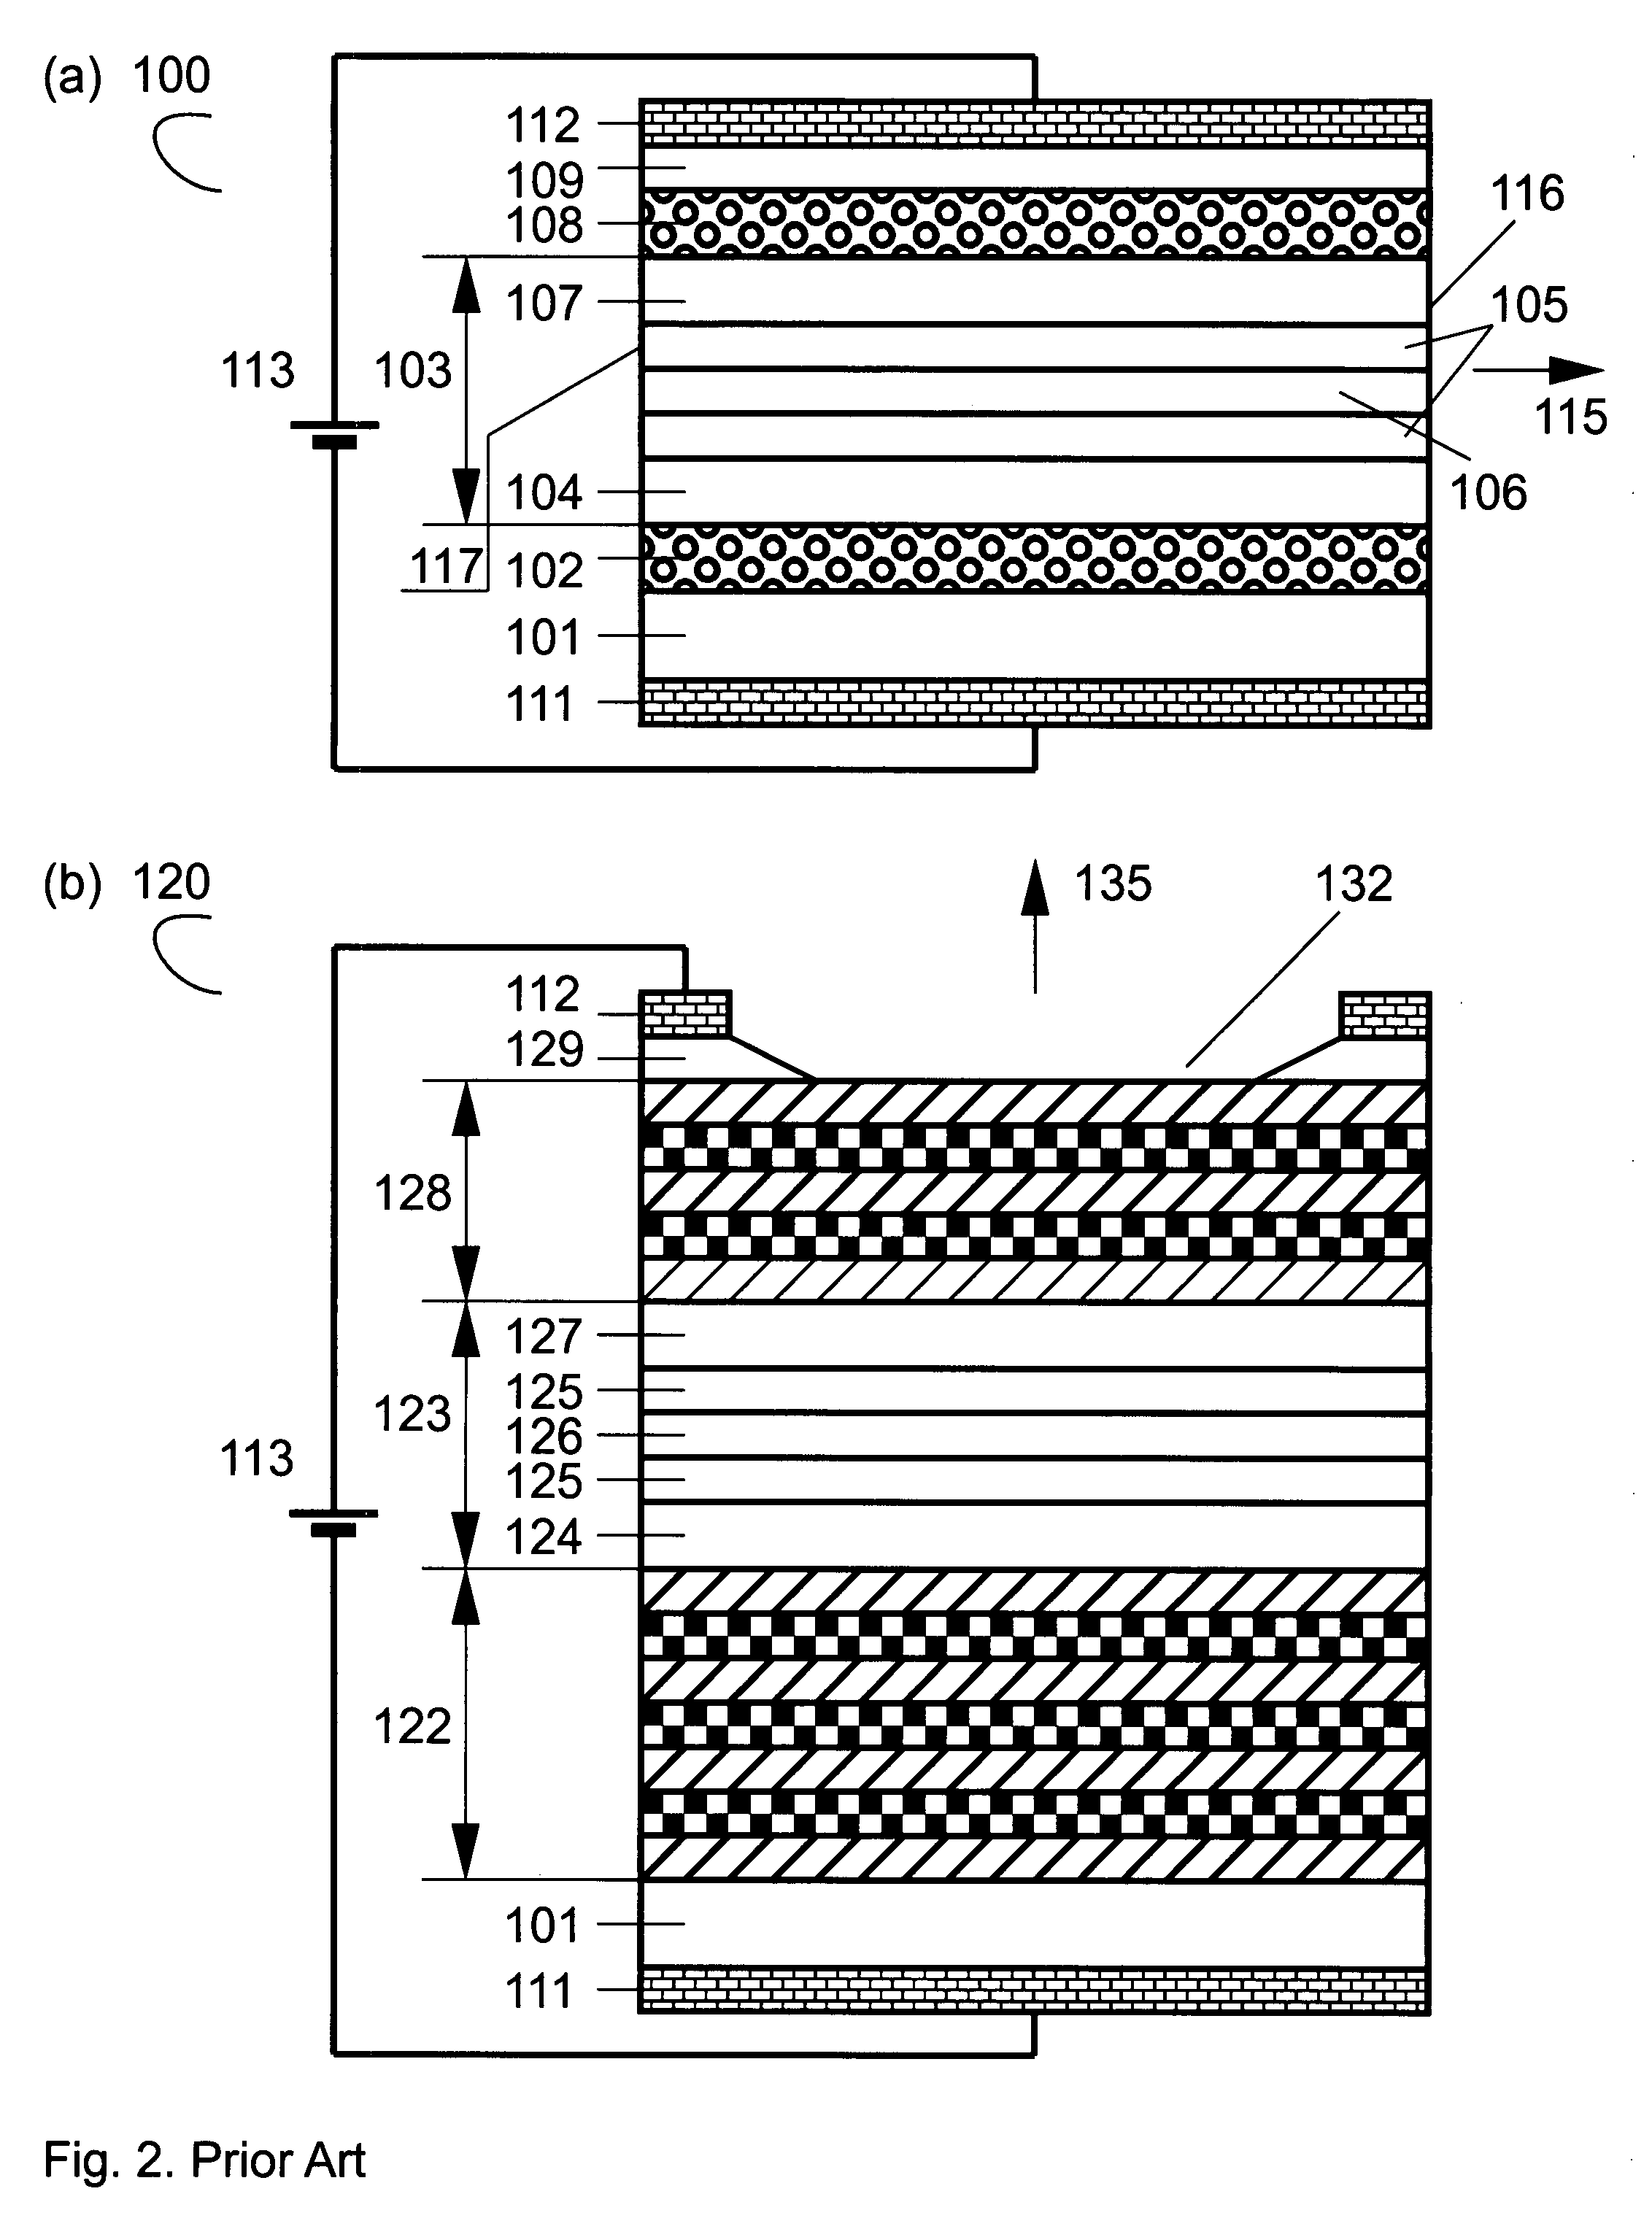 Resonant cavity optoelectronic device with suppressed parasitic modes